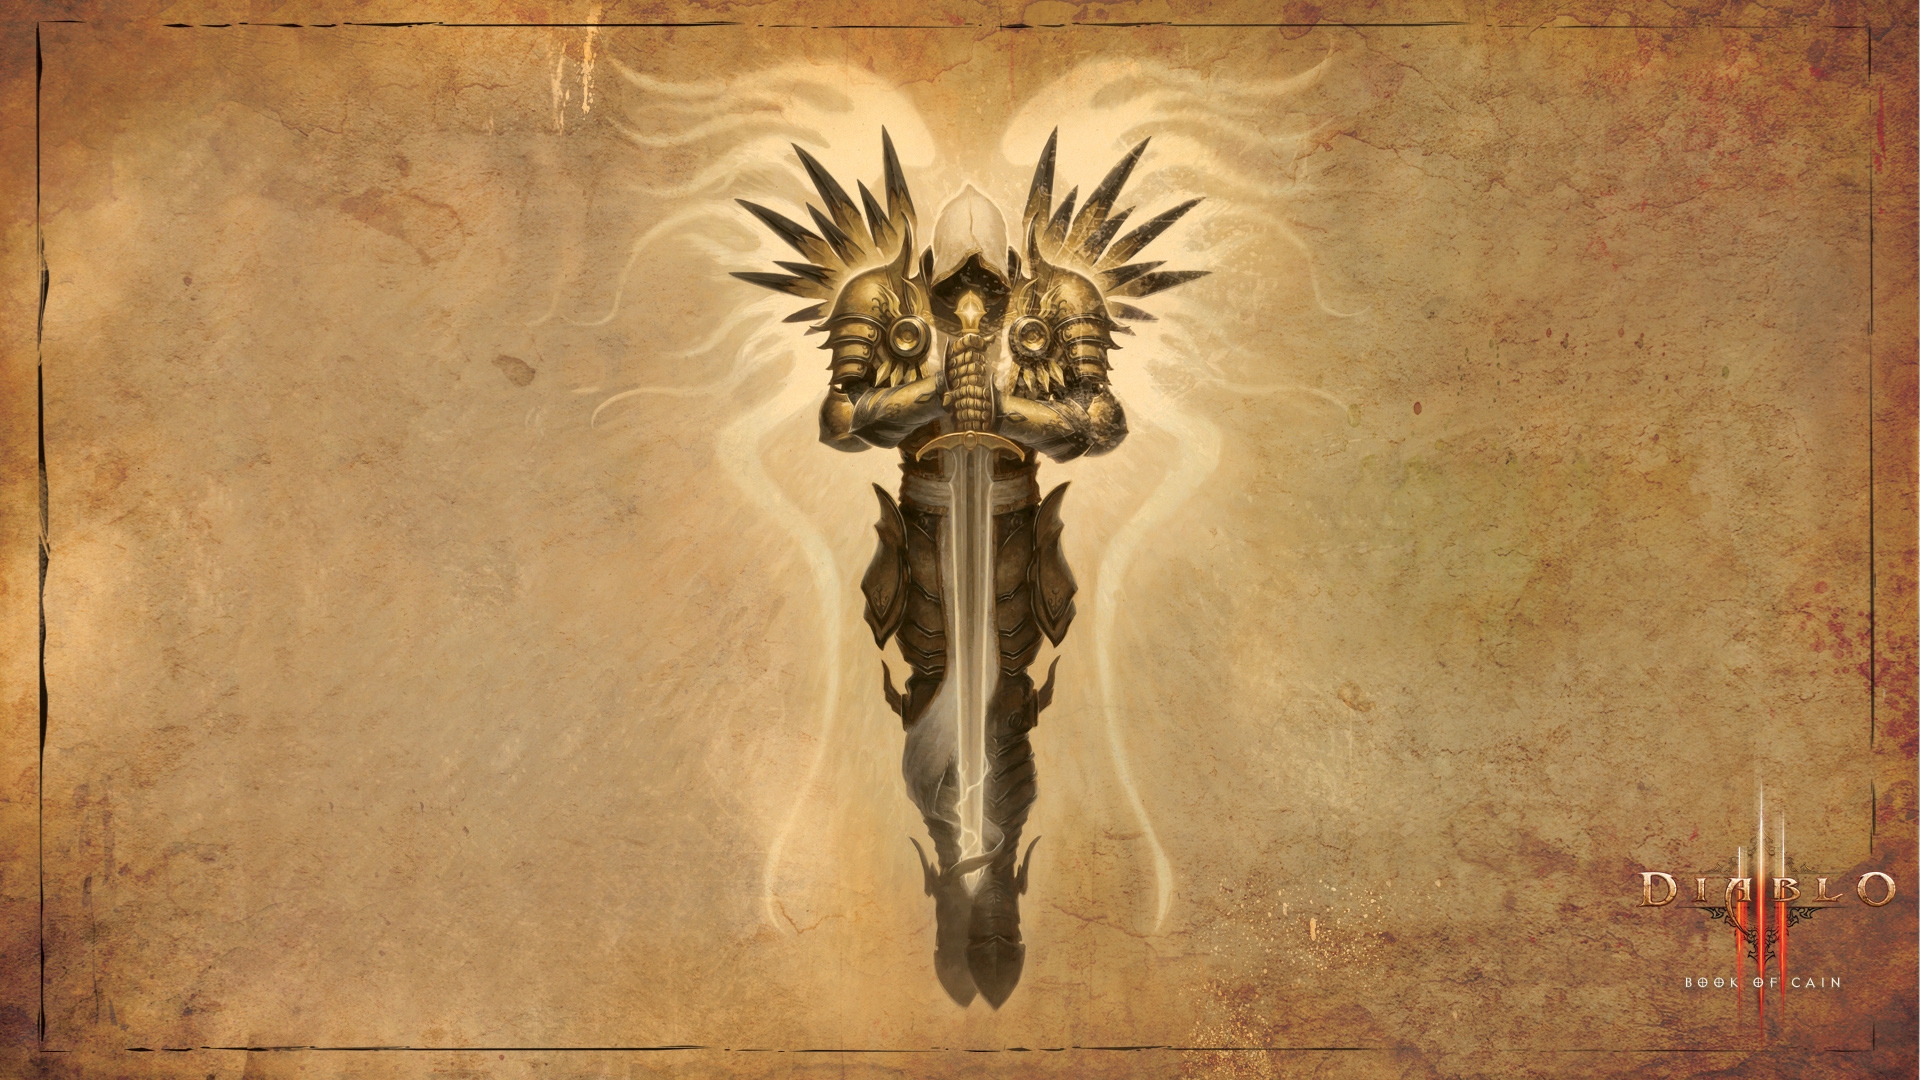 Book of Cain Diablo 3 for 1920 x 1080 HDTV 1080p resolution